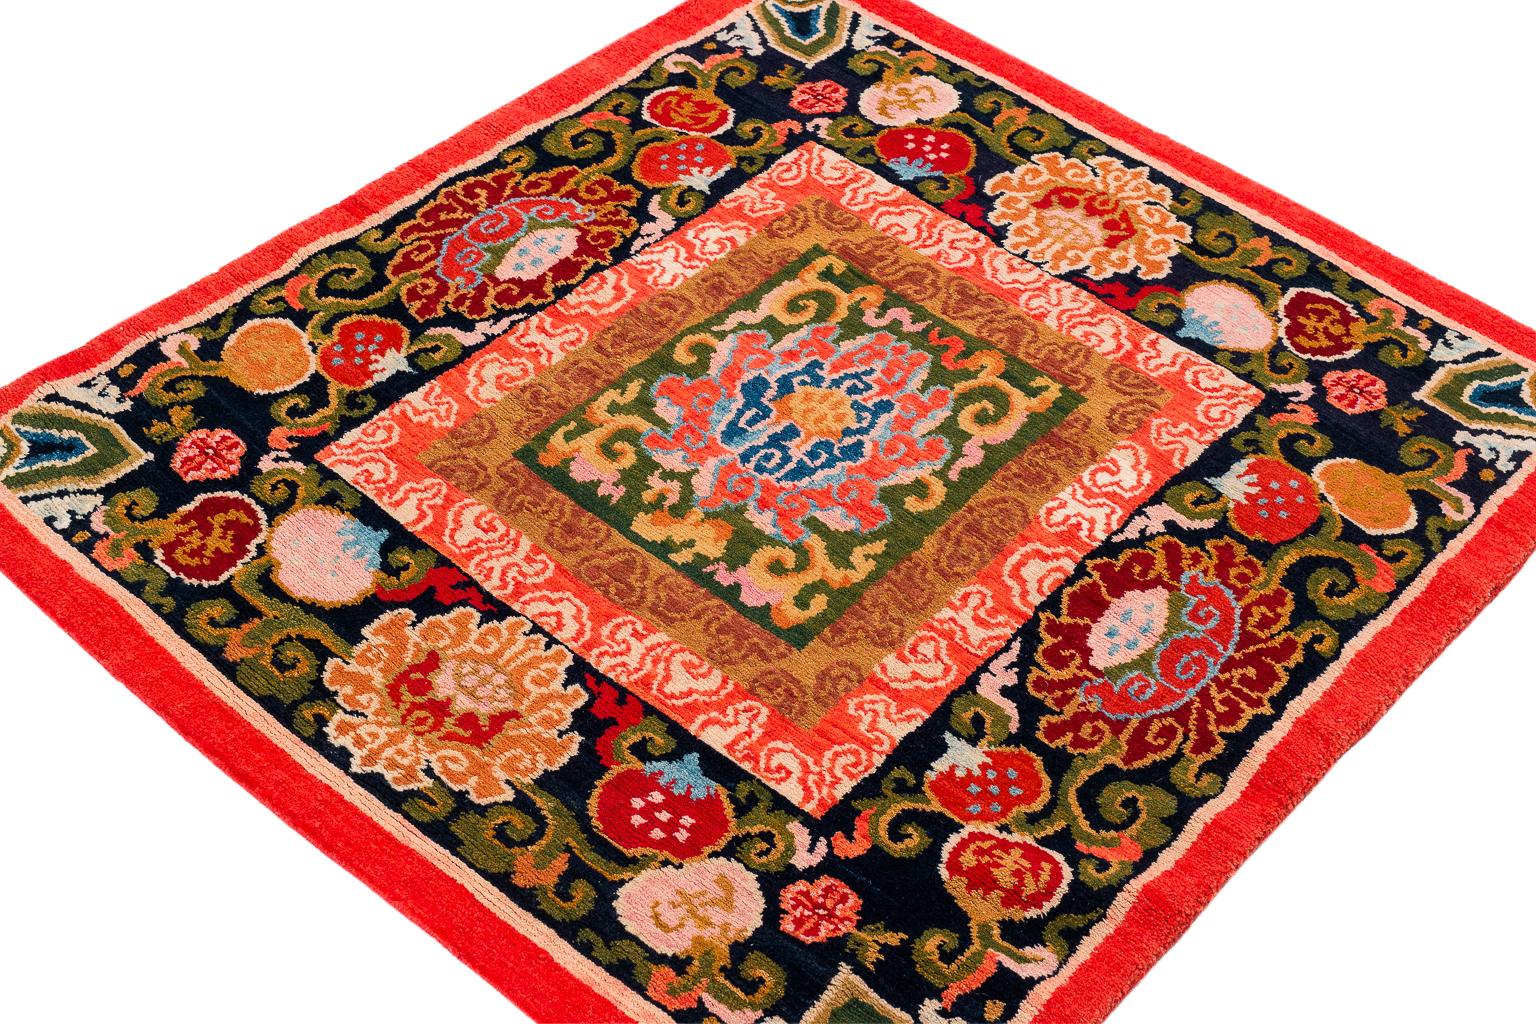 This spectacular reproduction of a small antique Tibetan mat was made with 100% vegetable dyes and made using authentic Tibetan weaving techniques. The carpet is 100% Himalayan wool and woven in a beautiful black and red color scheme with